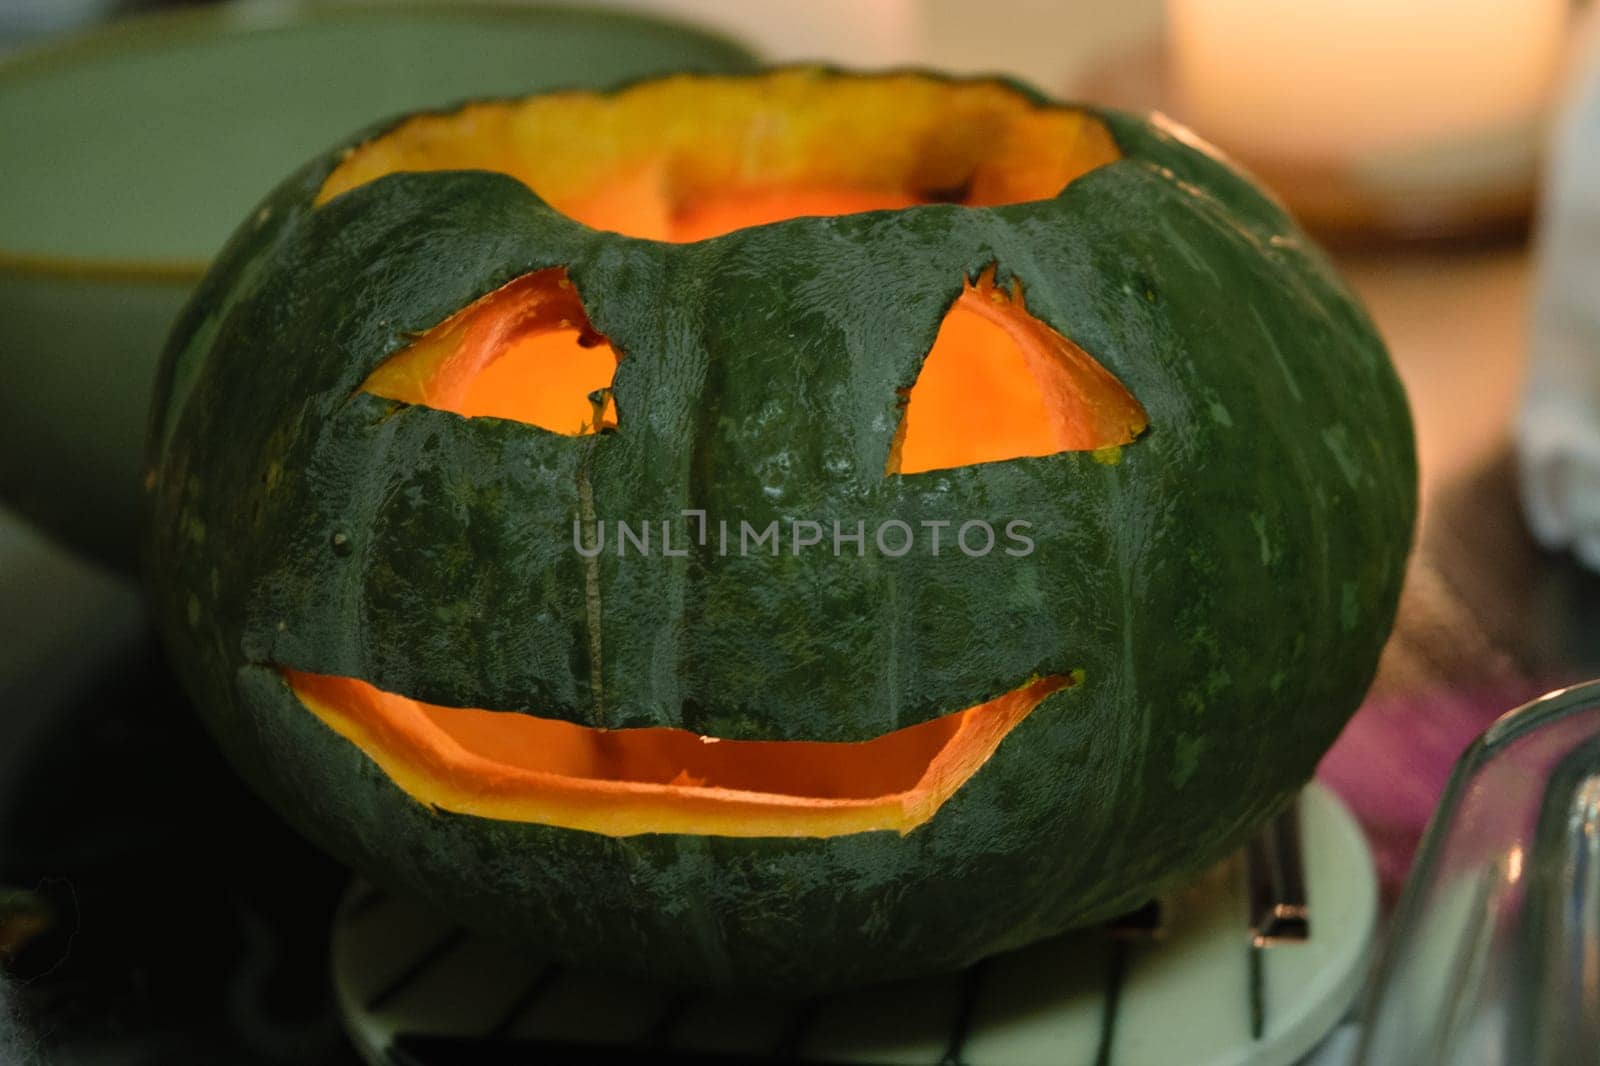 Hand-carved green pumpkin with a glowing interior and a smiling jack-o'-lantern face, set against a soft-focus background.